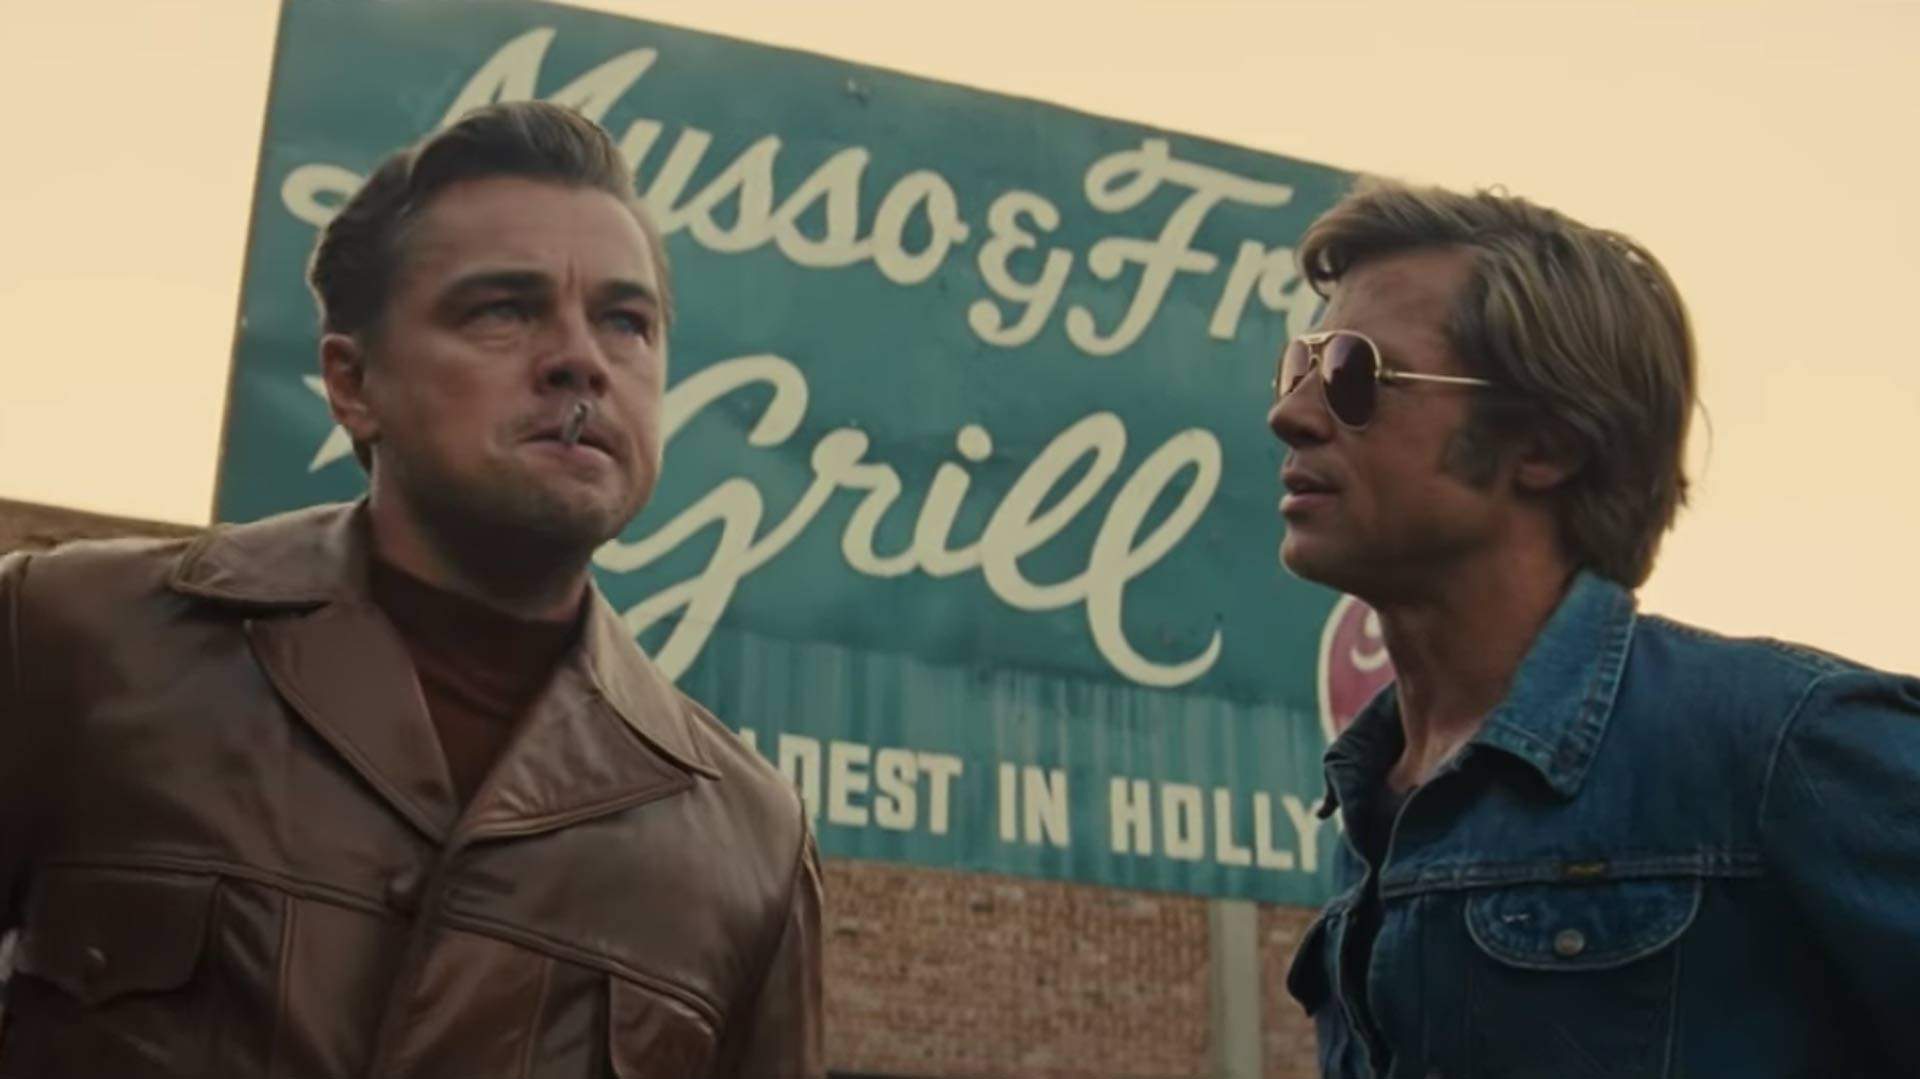 The Full Trailer Has Dropped for Quentin Tarantino's Star-Studded 'Once Upon a Time in Hollywood'